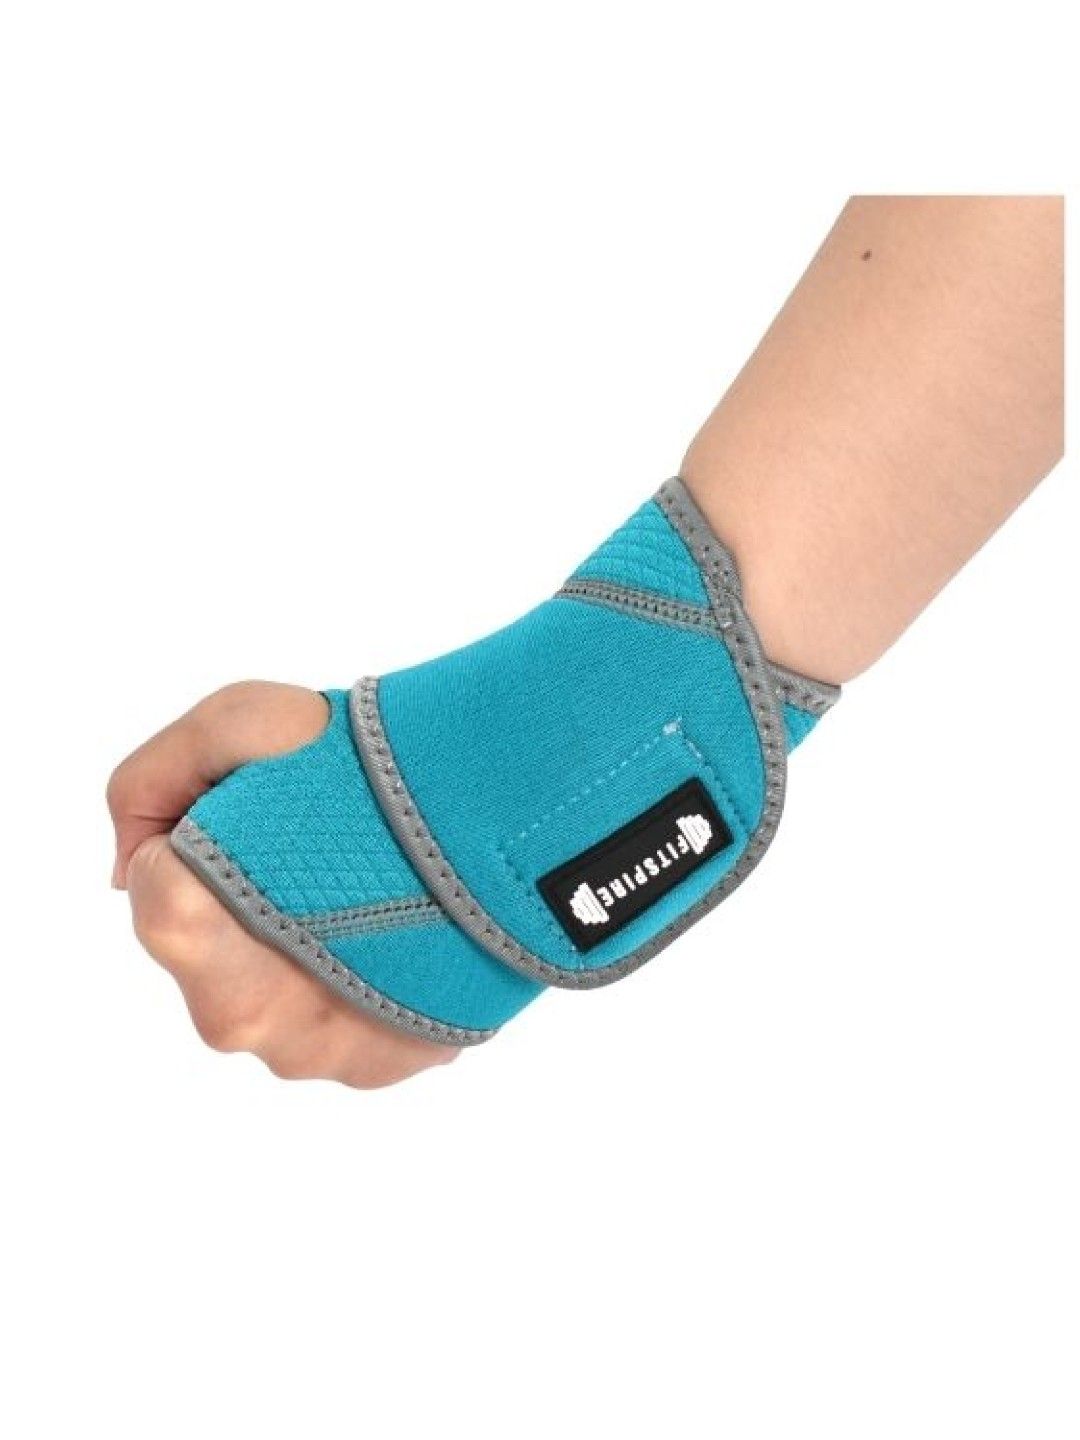 Sunbeams Lifestyle Fitspire Wrist Support Exercise/Fitness/Gym/Workout Equipment